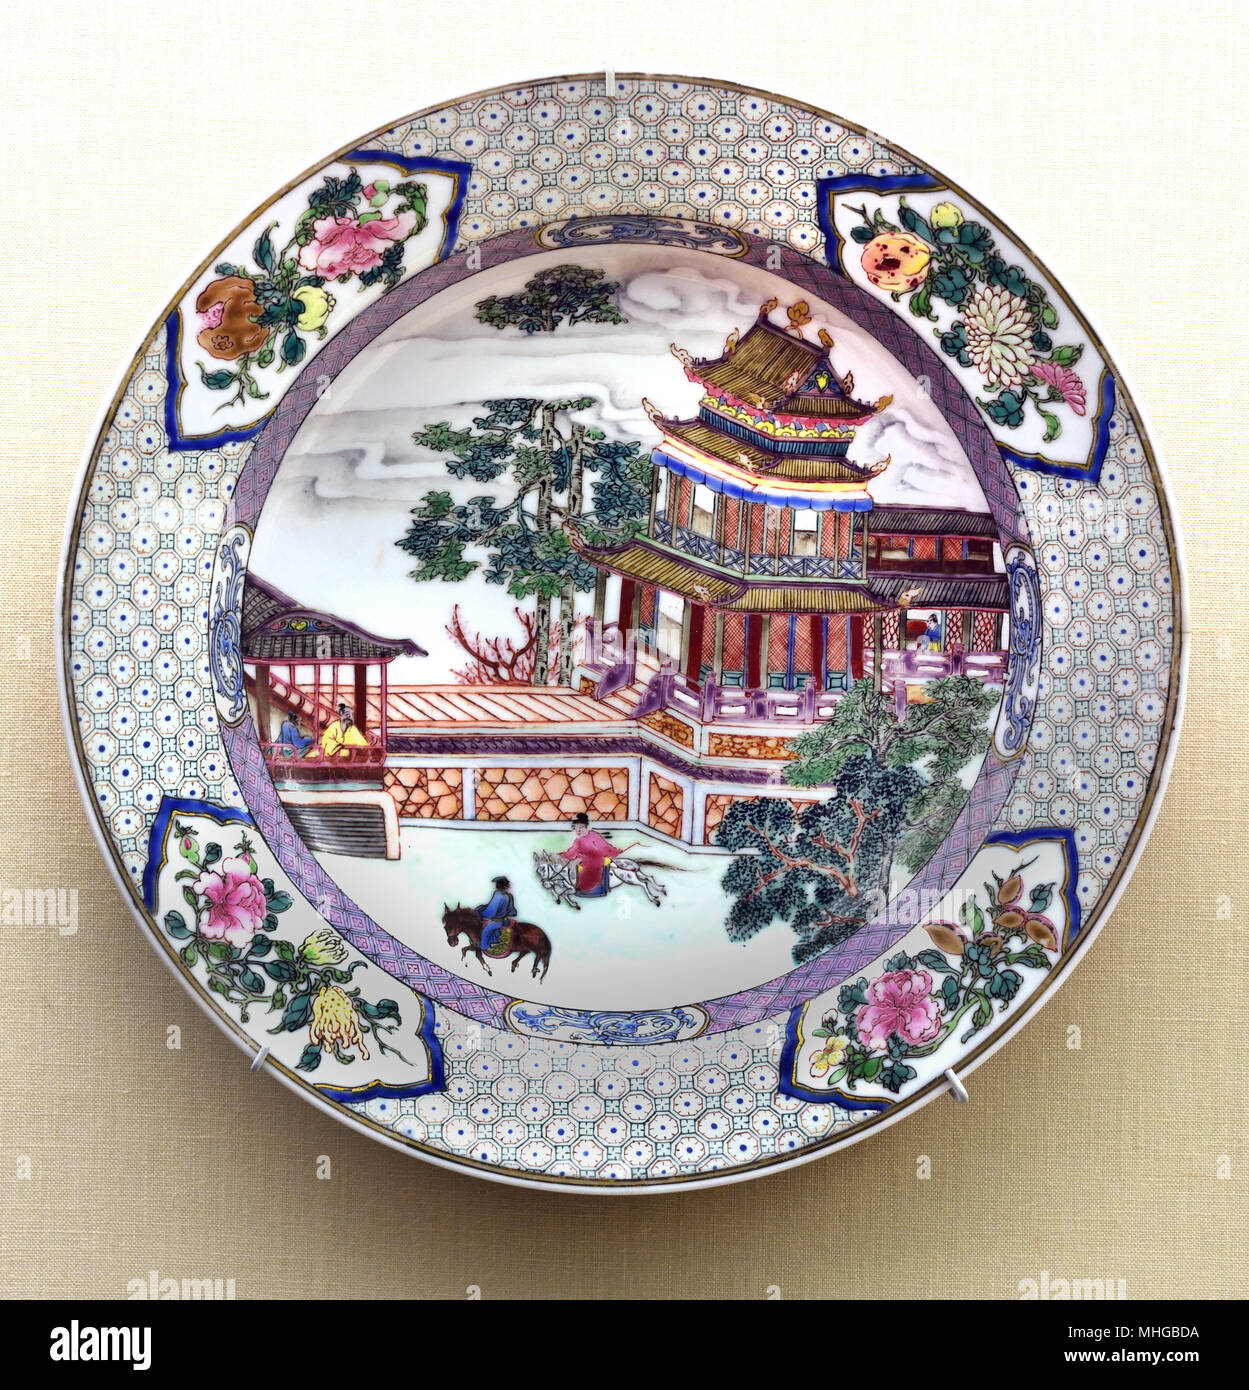 Eggshell Plates ( Yongzheng period ) Qing Dynasty Enamelled Porcelain ( The Qing dynasty, also known as the Qing Empire, officially the Great Qing, was the last imperial dynasty of China, established in 1636 and ruling China from 1644 to 1912.  ) Stock Photo